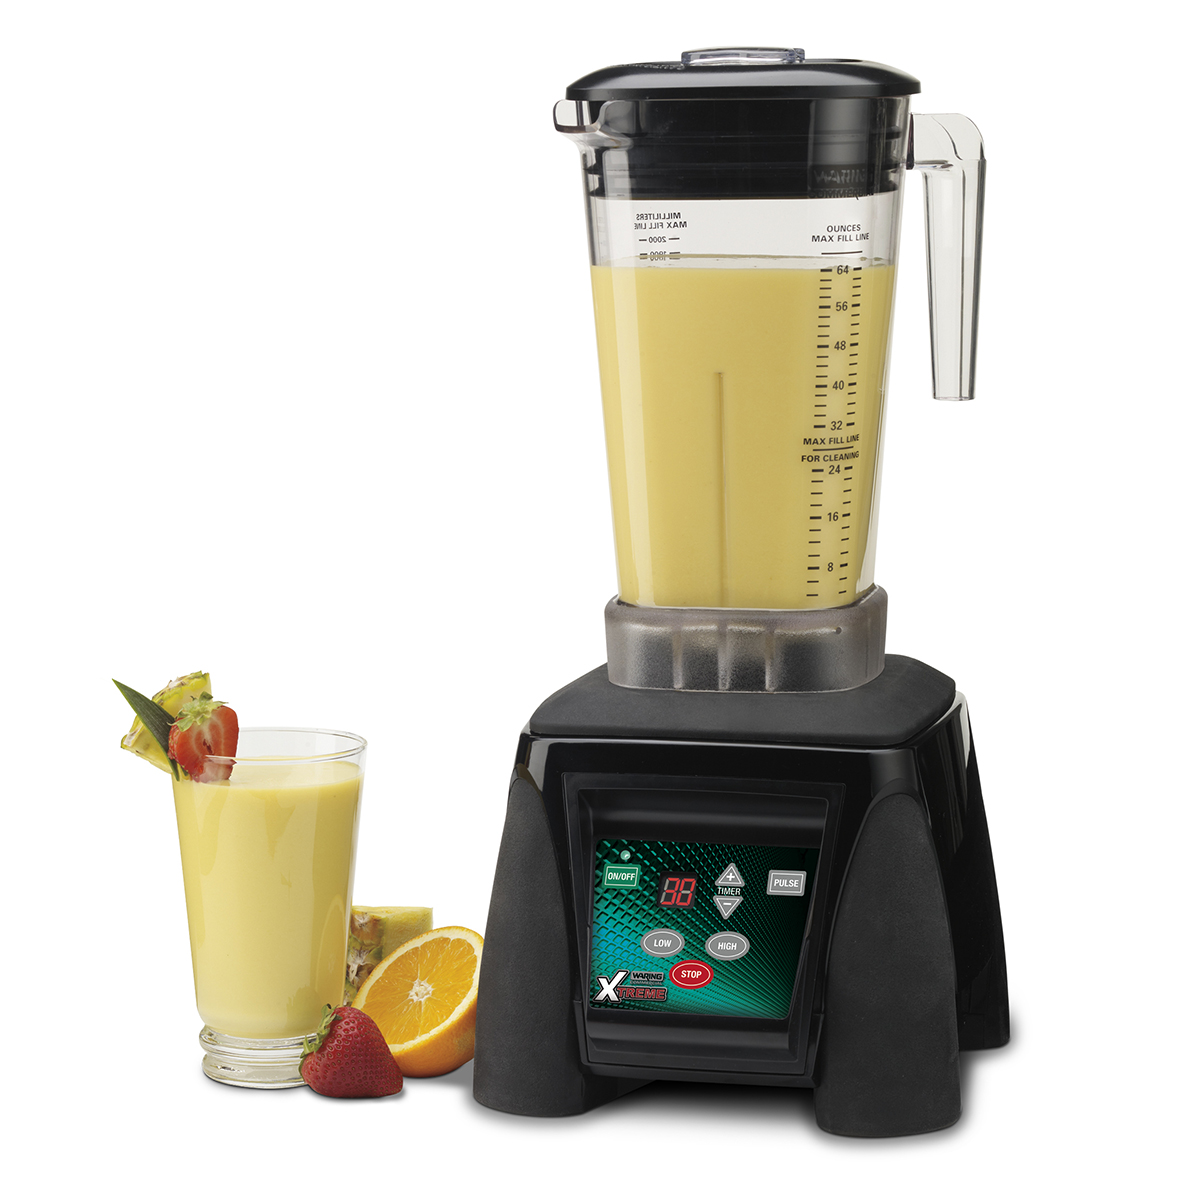 Waring Commercial Hi-Power Electronic Keypad Blender with The